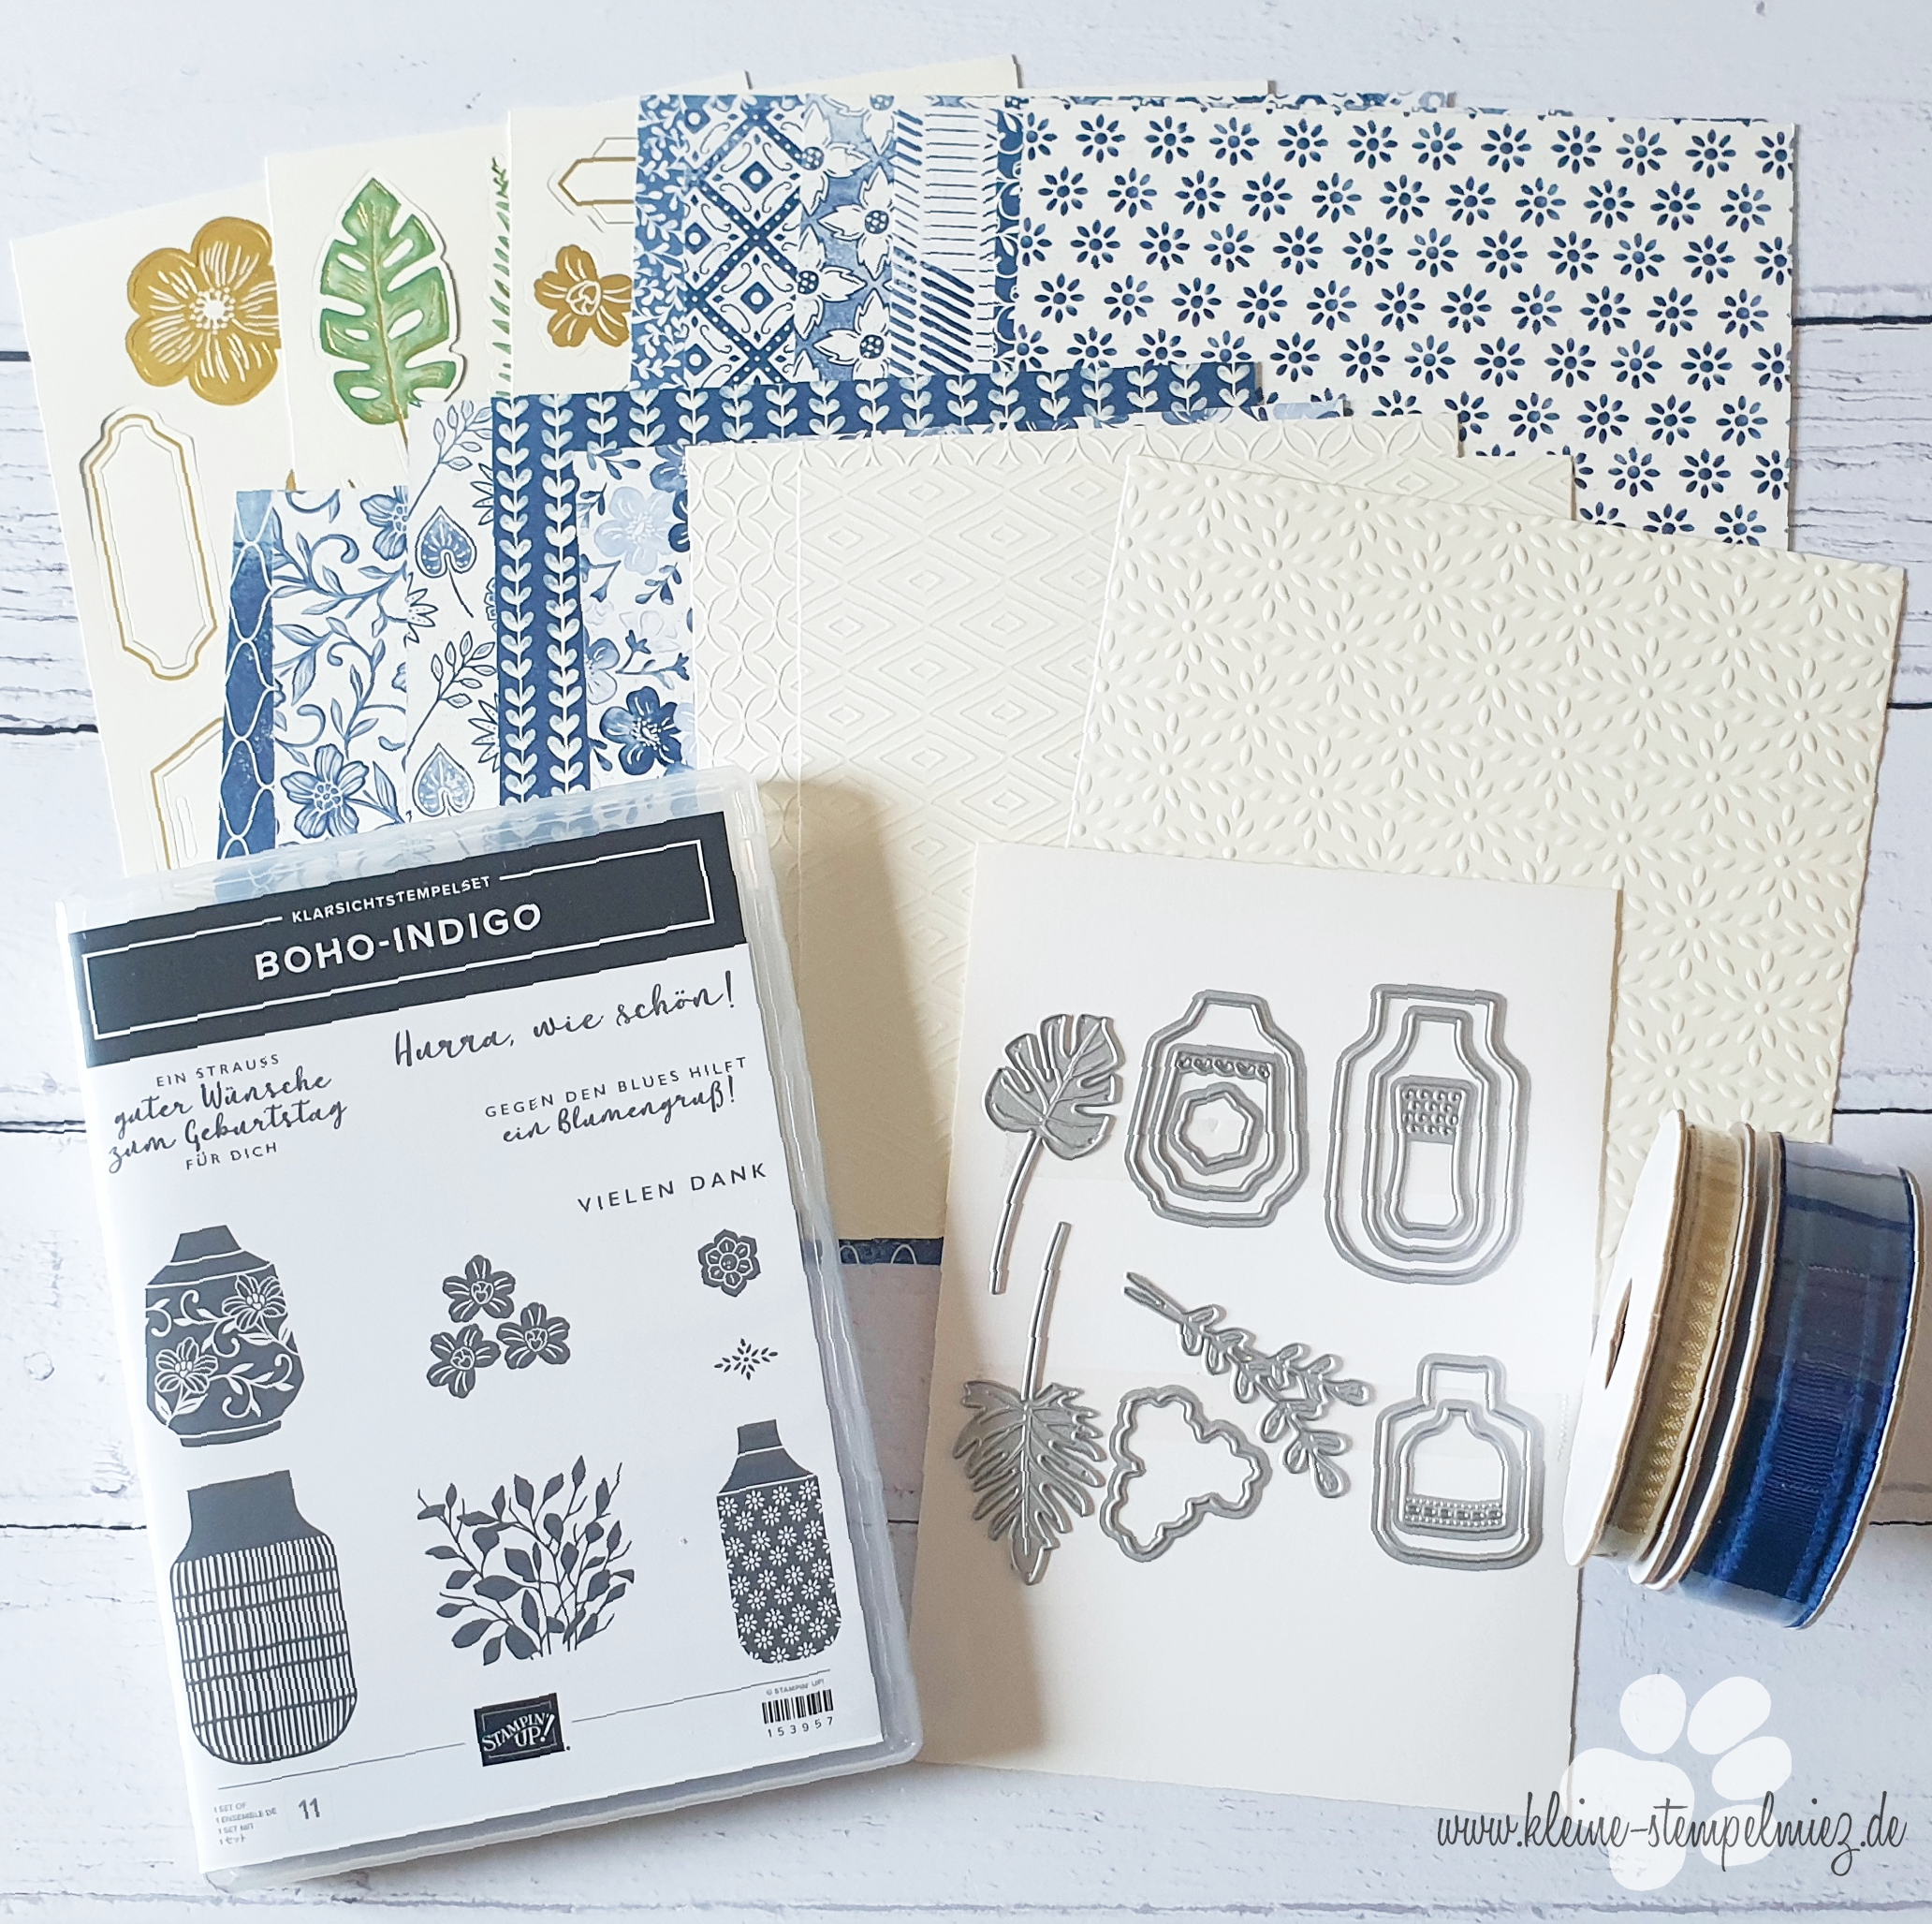 Stampin‘ Friends Blog Hop – What’s going on